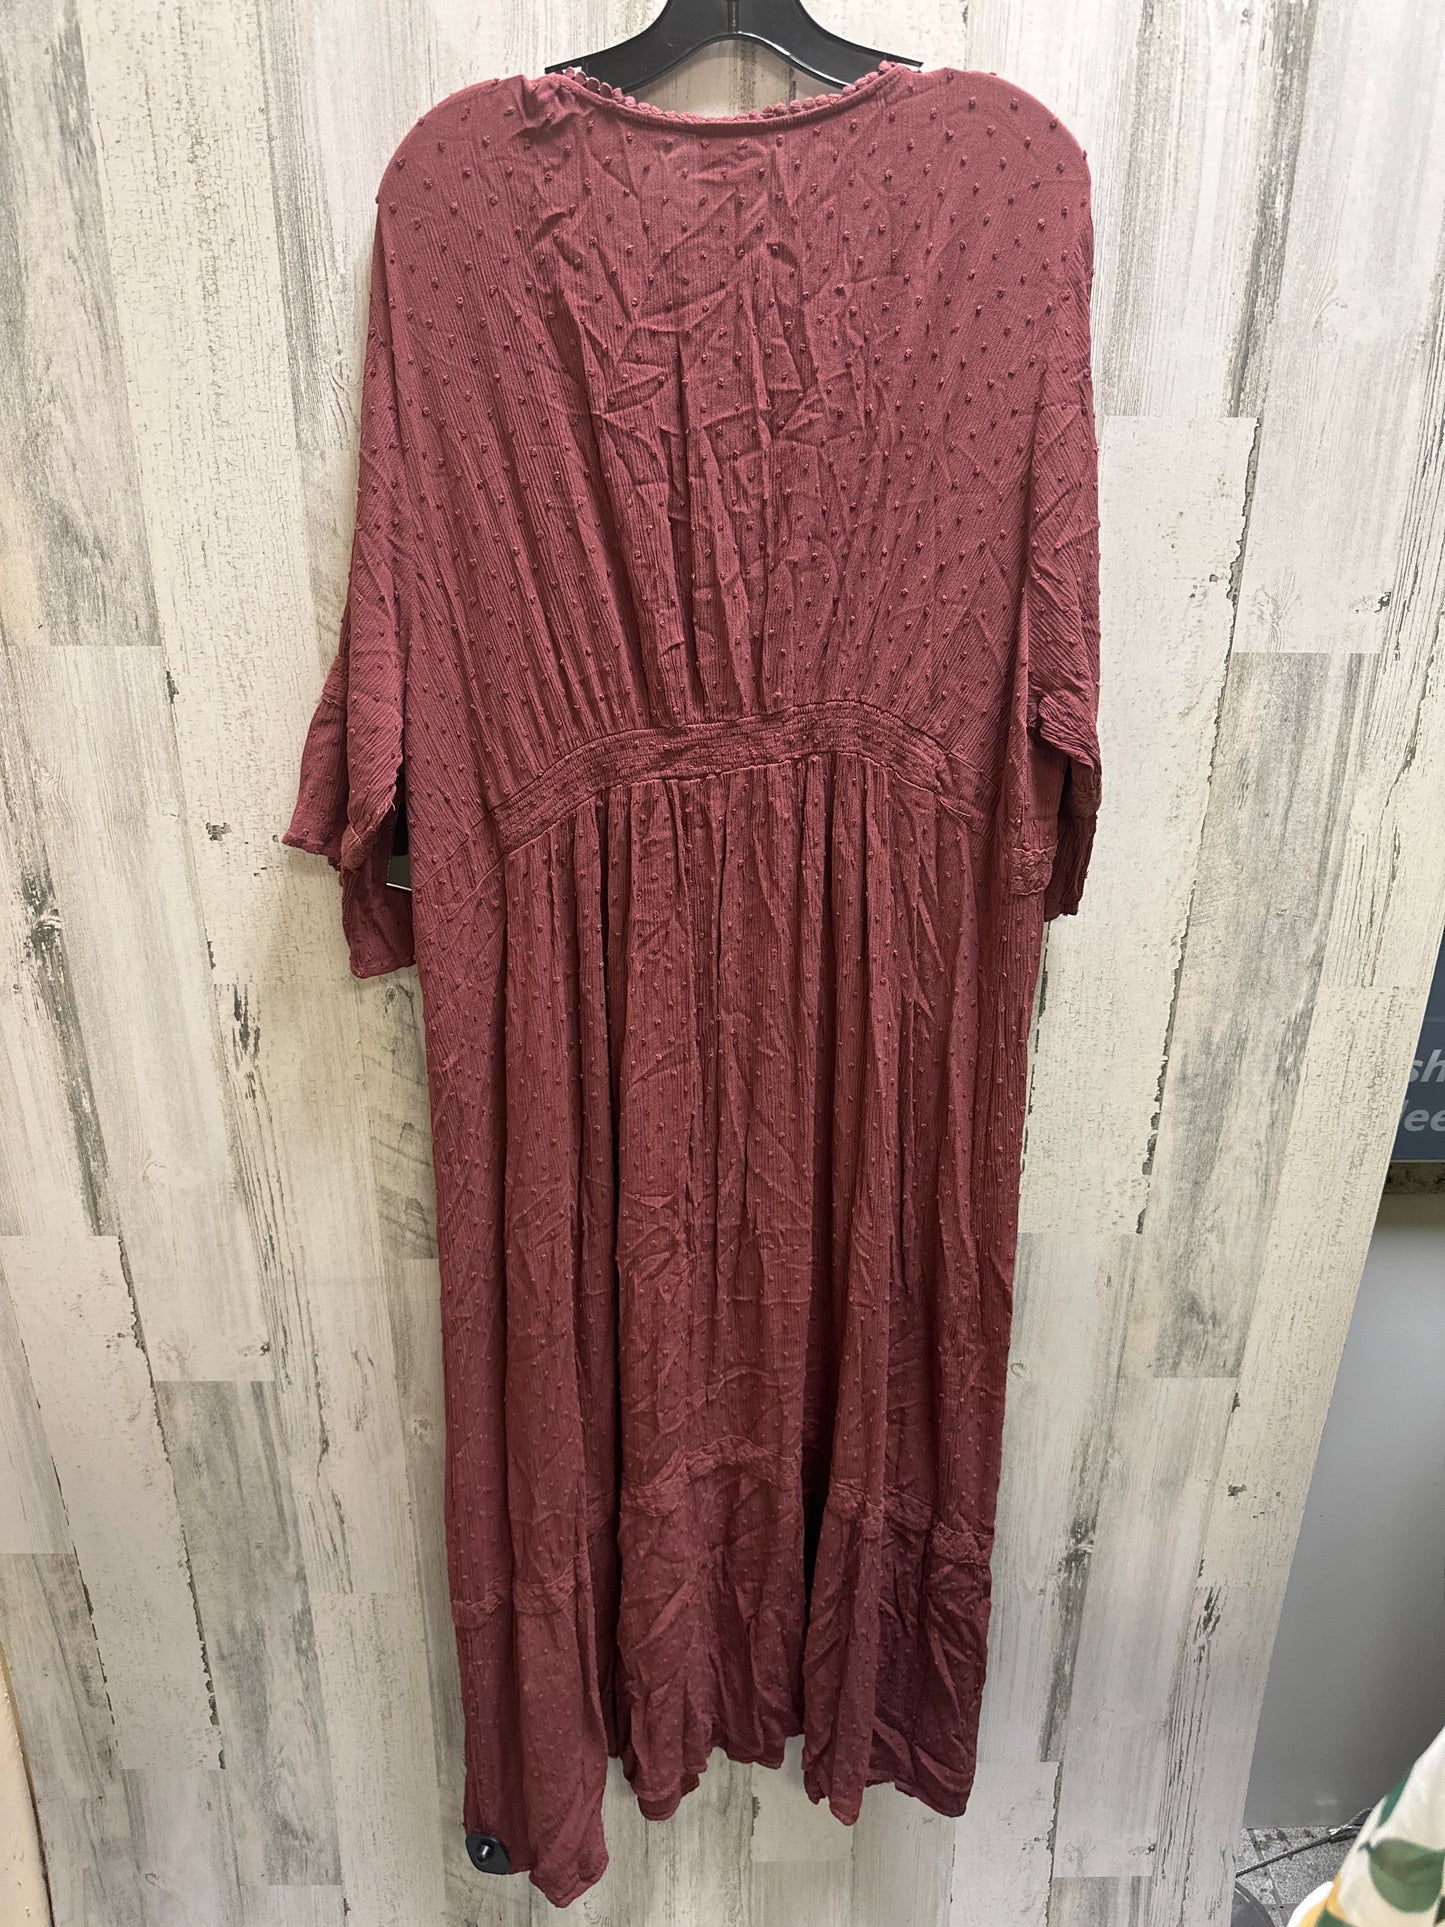 Red Dress Casual Maxi Knox Rose, Size 3x